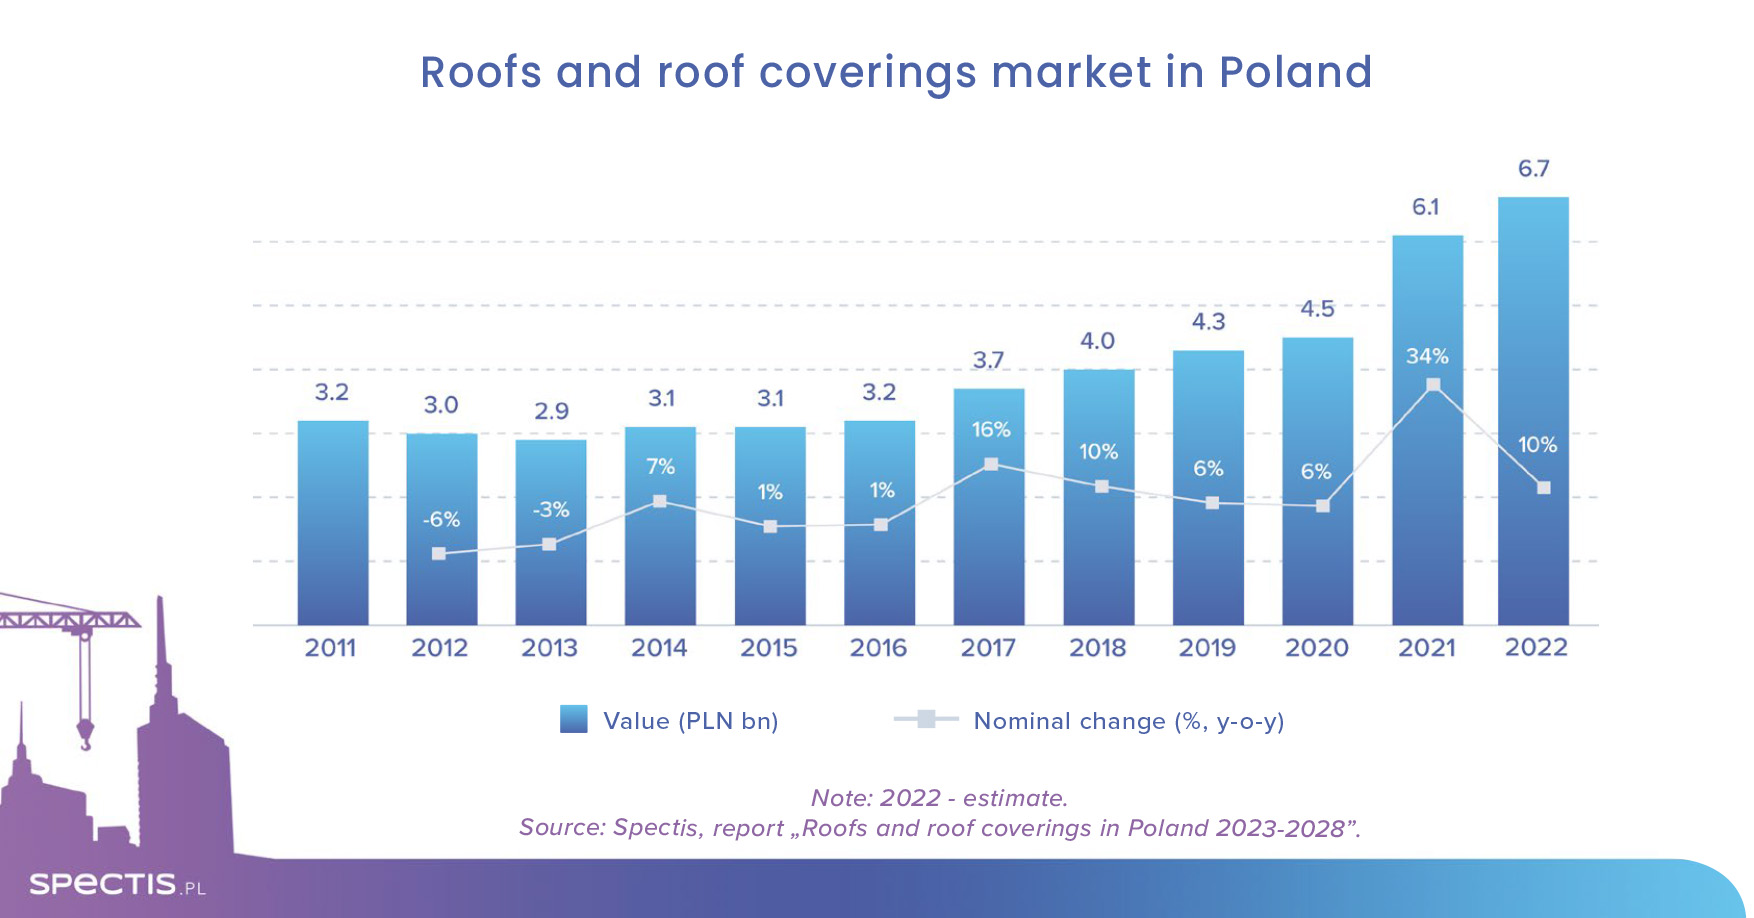 Value of the roof coverings market in Poland exceeds PLN 6bn